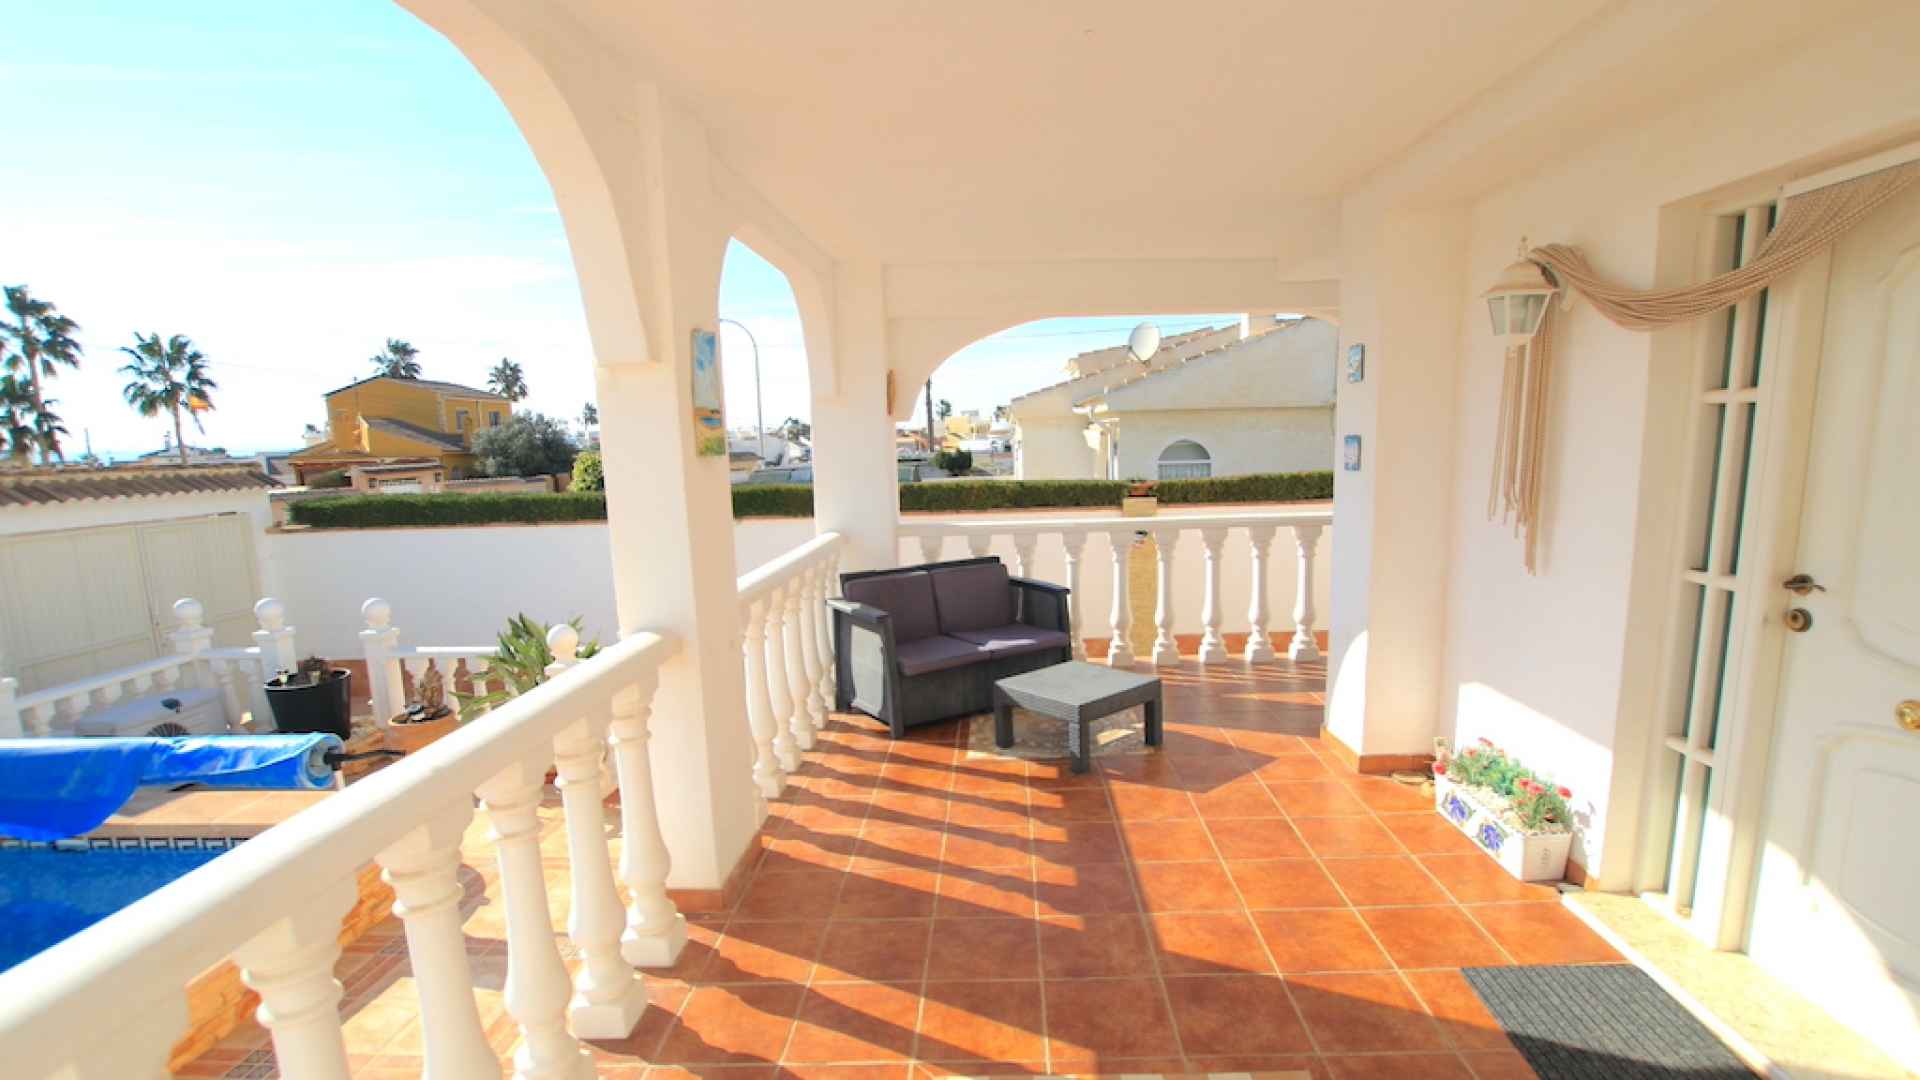 48358_expansive_4_bed_detached_villa_with_private_pool_and_garage_220224130512_img_7443